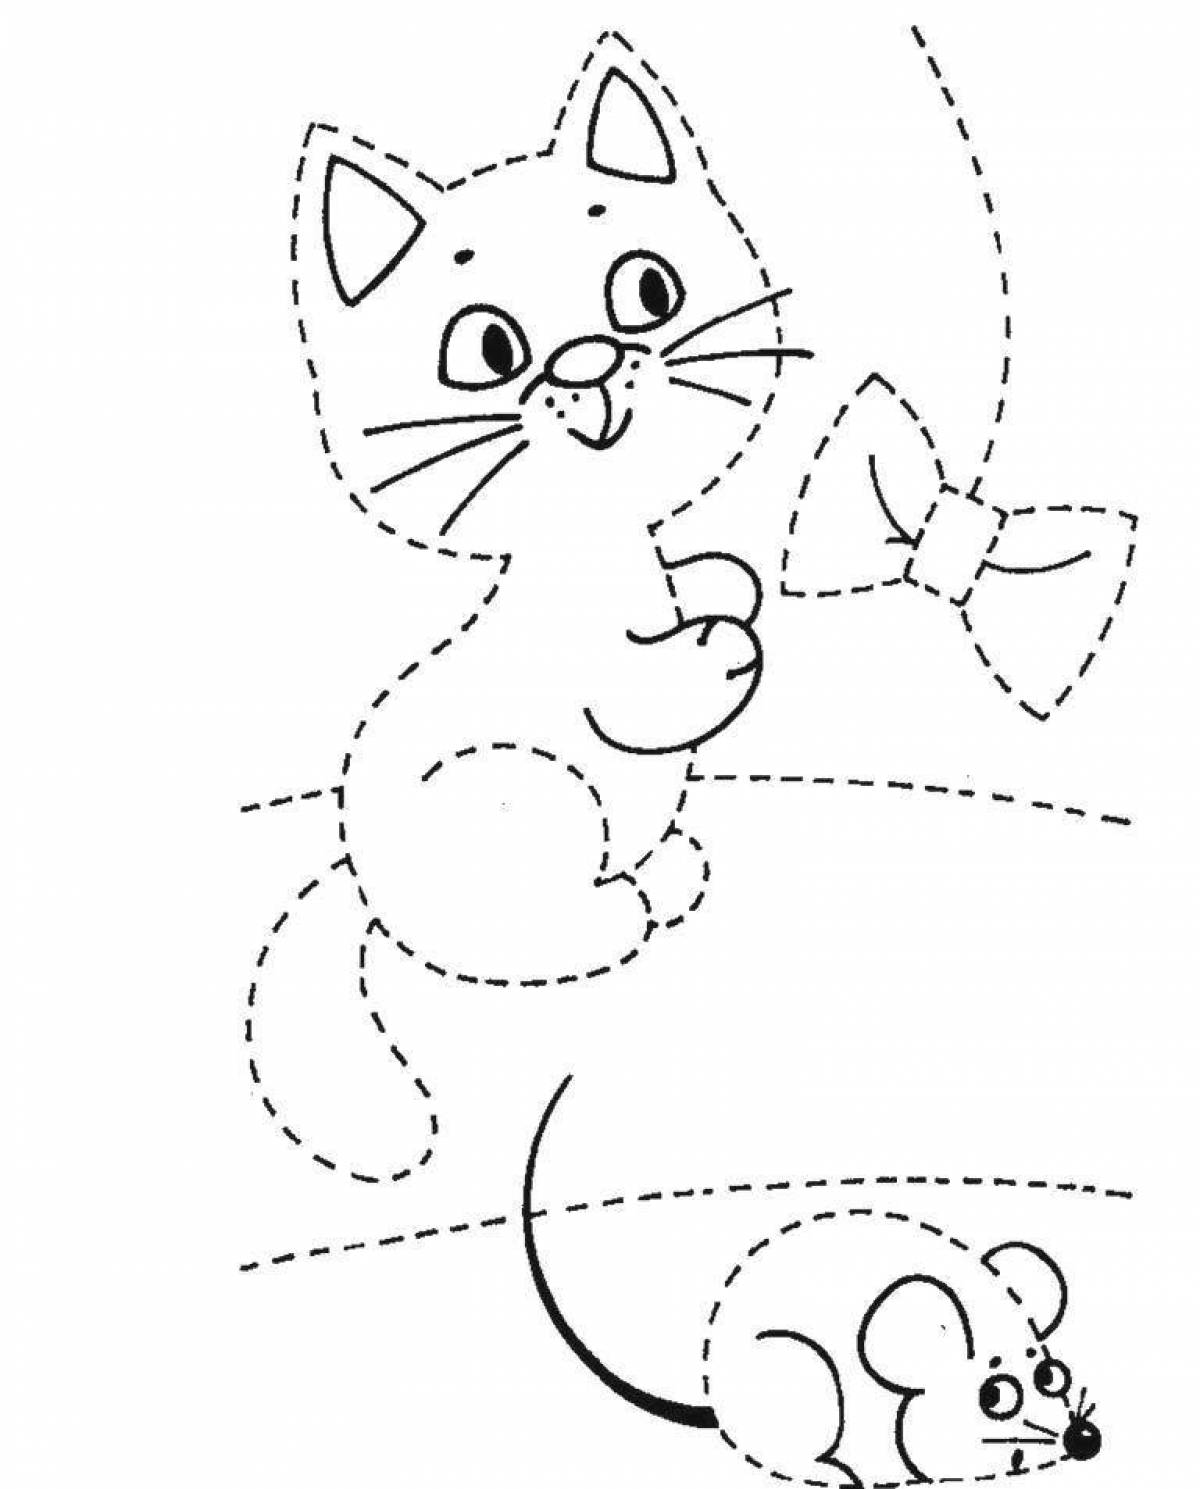 Magic dot coloring for 3-4 year olds